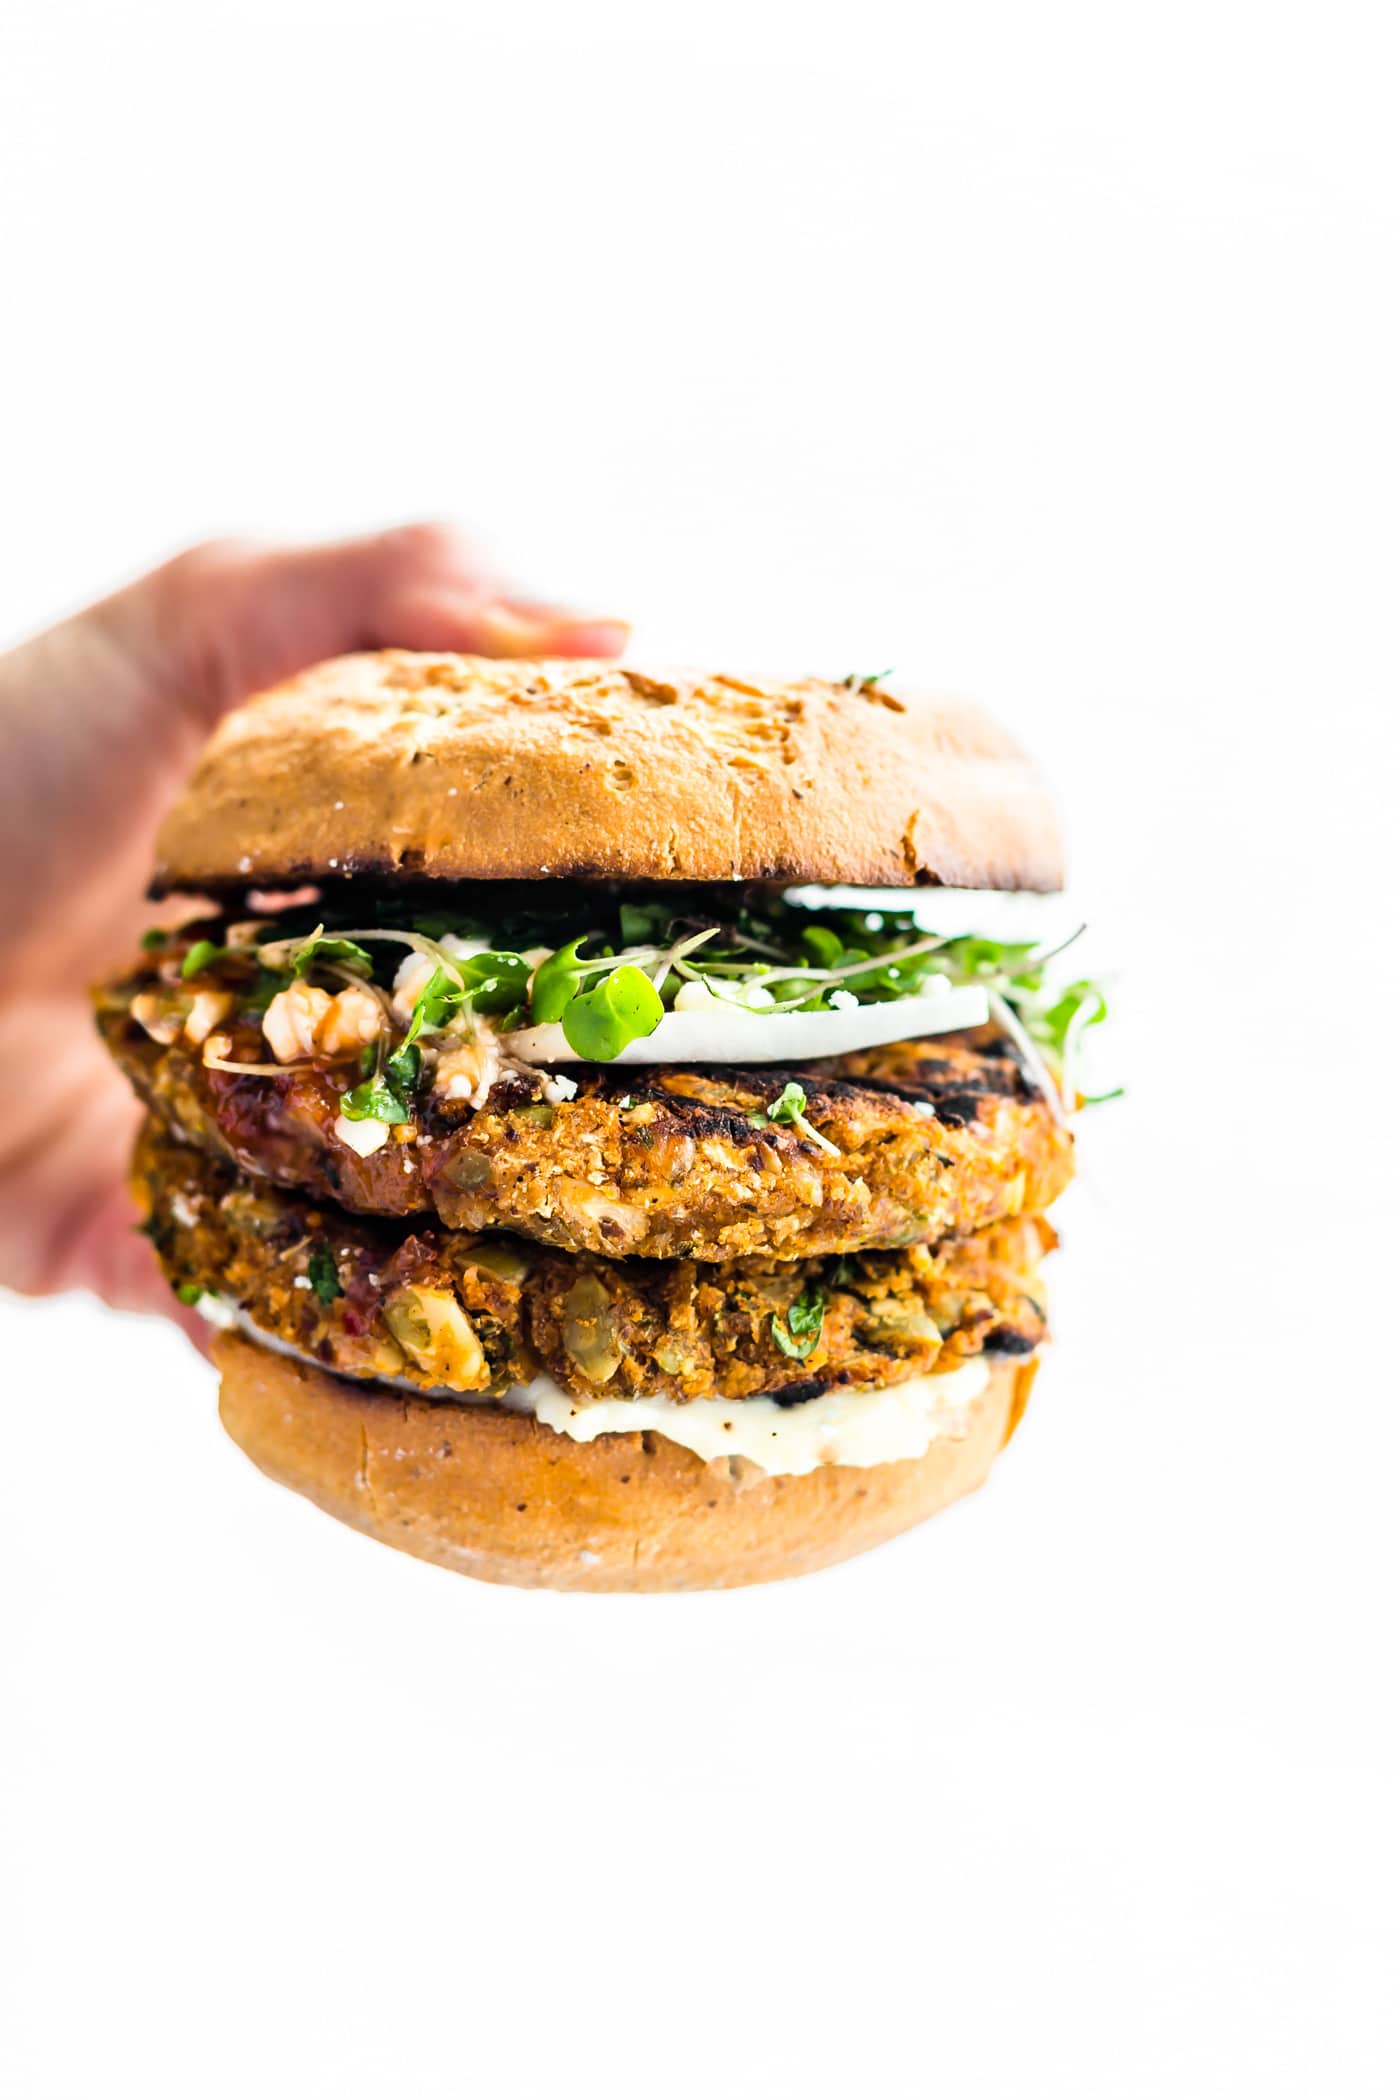 Grilled Moroccan Cauliflower Chickpea Burgers! Flavorful veggie-packed chickpea burgers made with plant based ingredients and served on gluten free hamburger buns! This is one killer gluten free veggie burger recipe you can make on the grill or in the oven! Moroccan spices mixed with cauliflower and chickpeas make these burgers to die for! Delicious, simple, healthy, and easy!